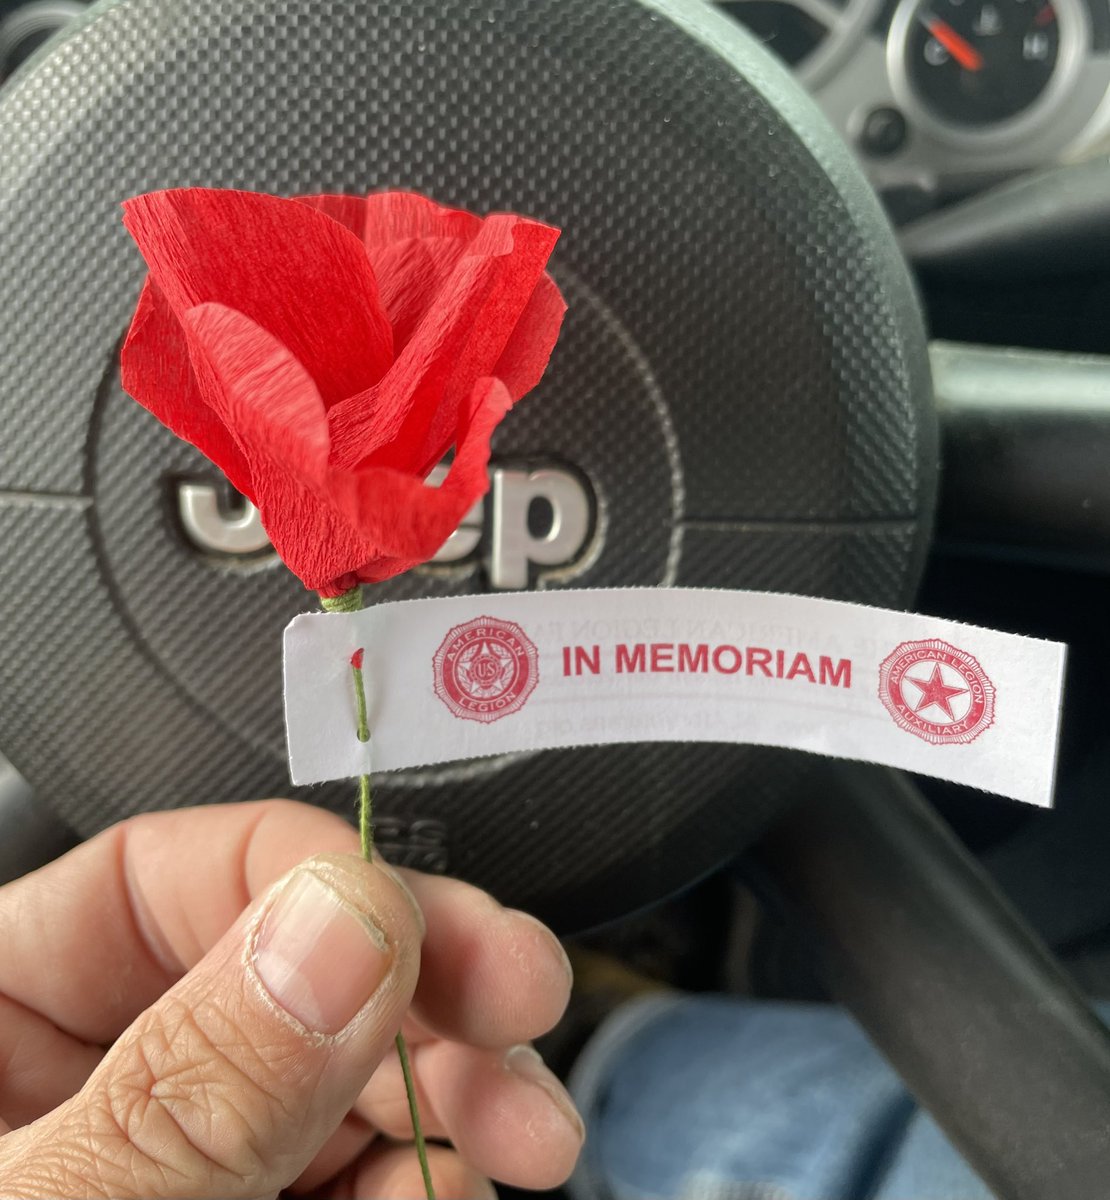 Get a poppy from the American Legion this Memorial Day weekend. Small talk with the old timers for a little while. They’re good men eager to share a story, a joke, a word of encouragement. It’ll brighten your day, I guarantee it —